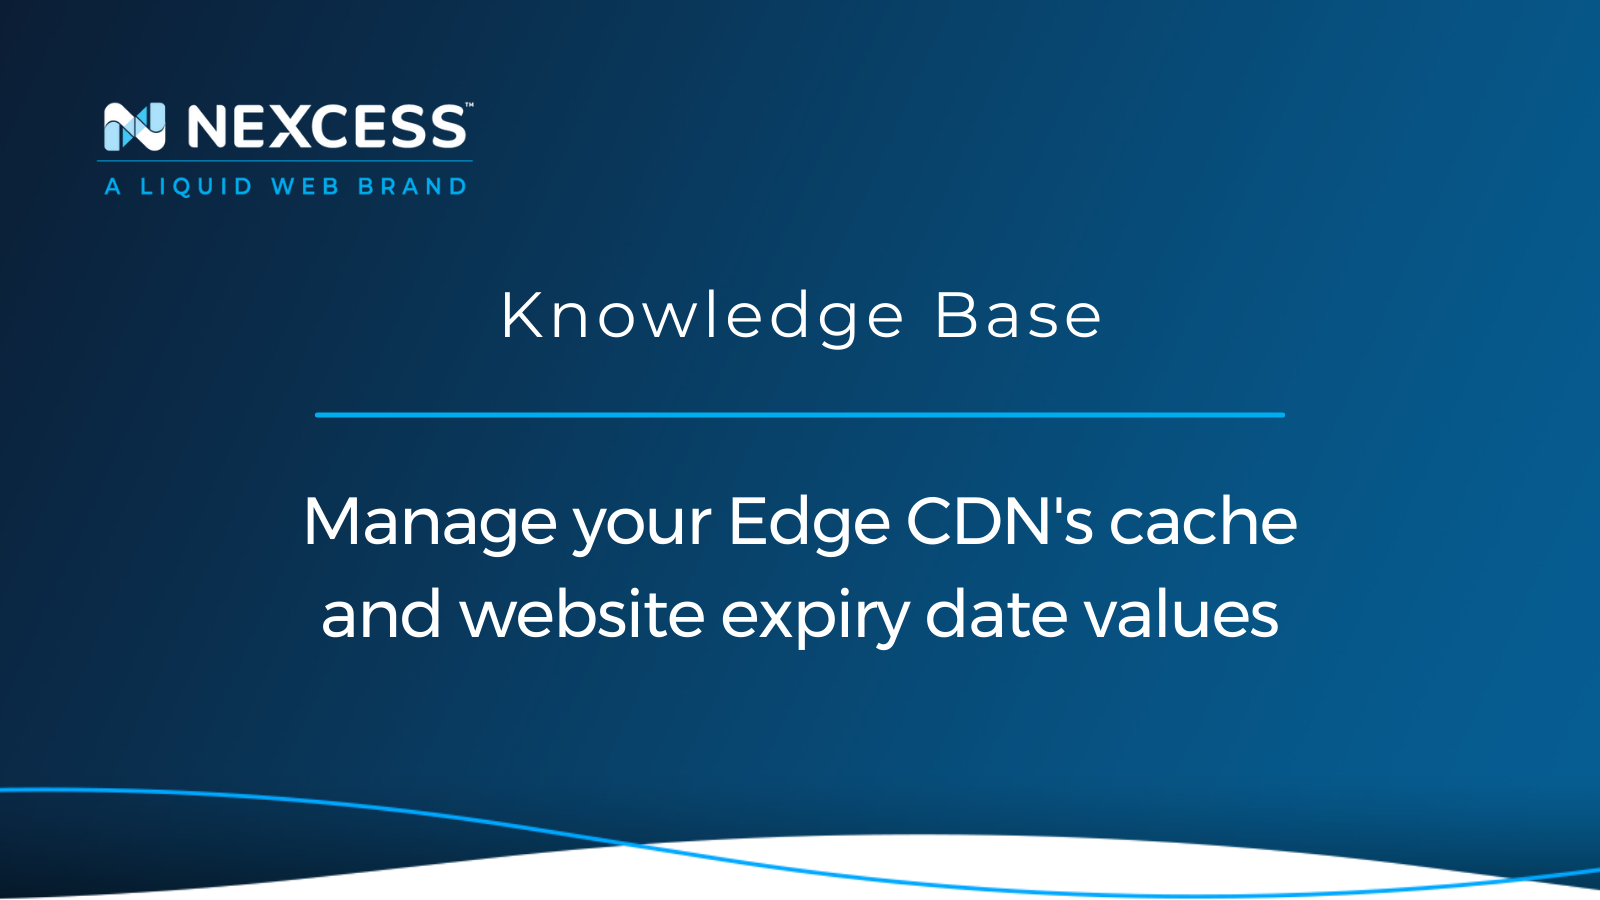 Manage your Edge CDN's cache and website expiry date values